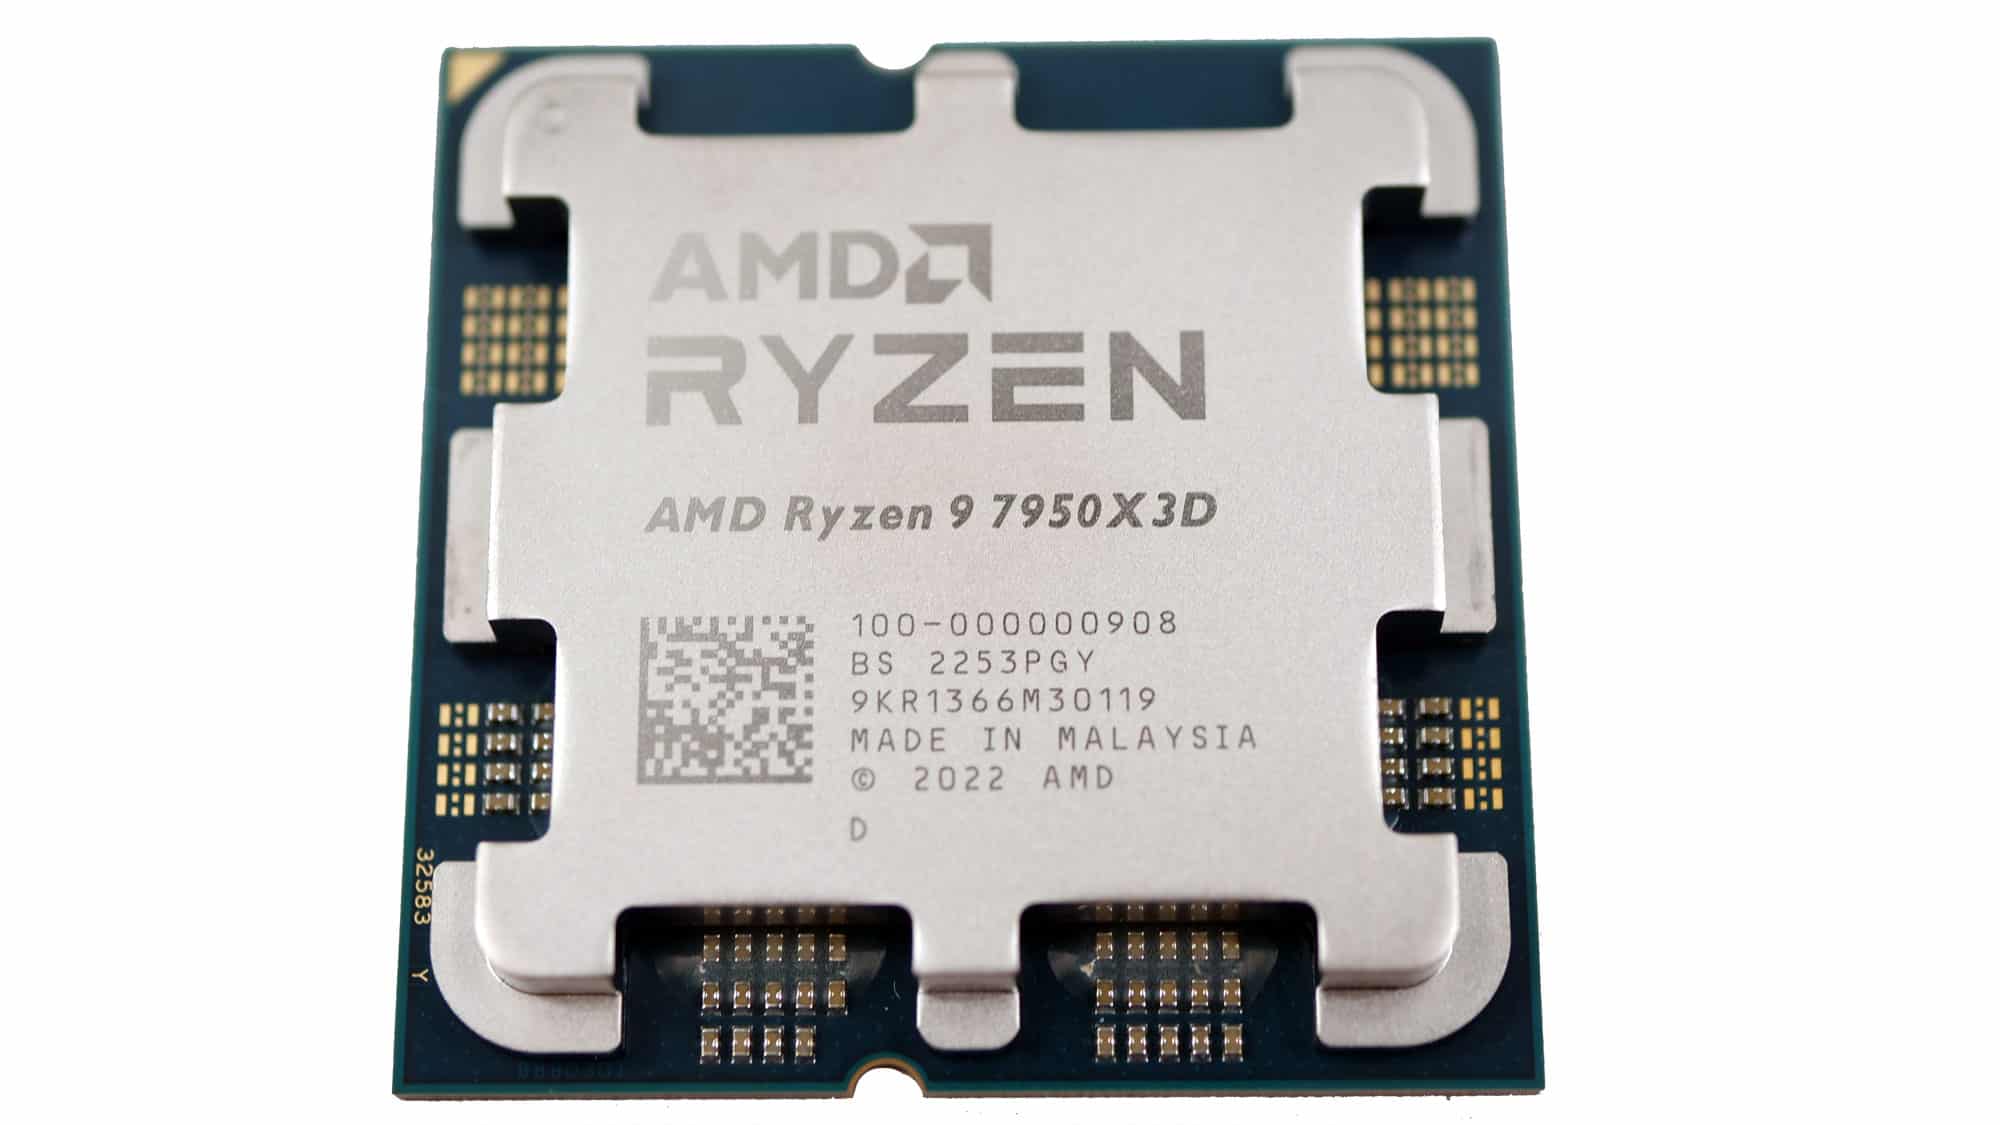 AMD Ryzen 9 7950X3D Reviews, Pros and Cons